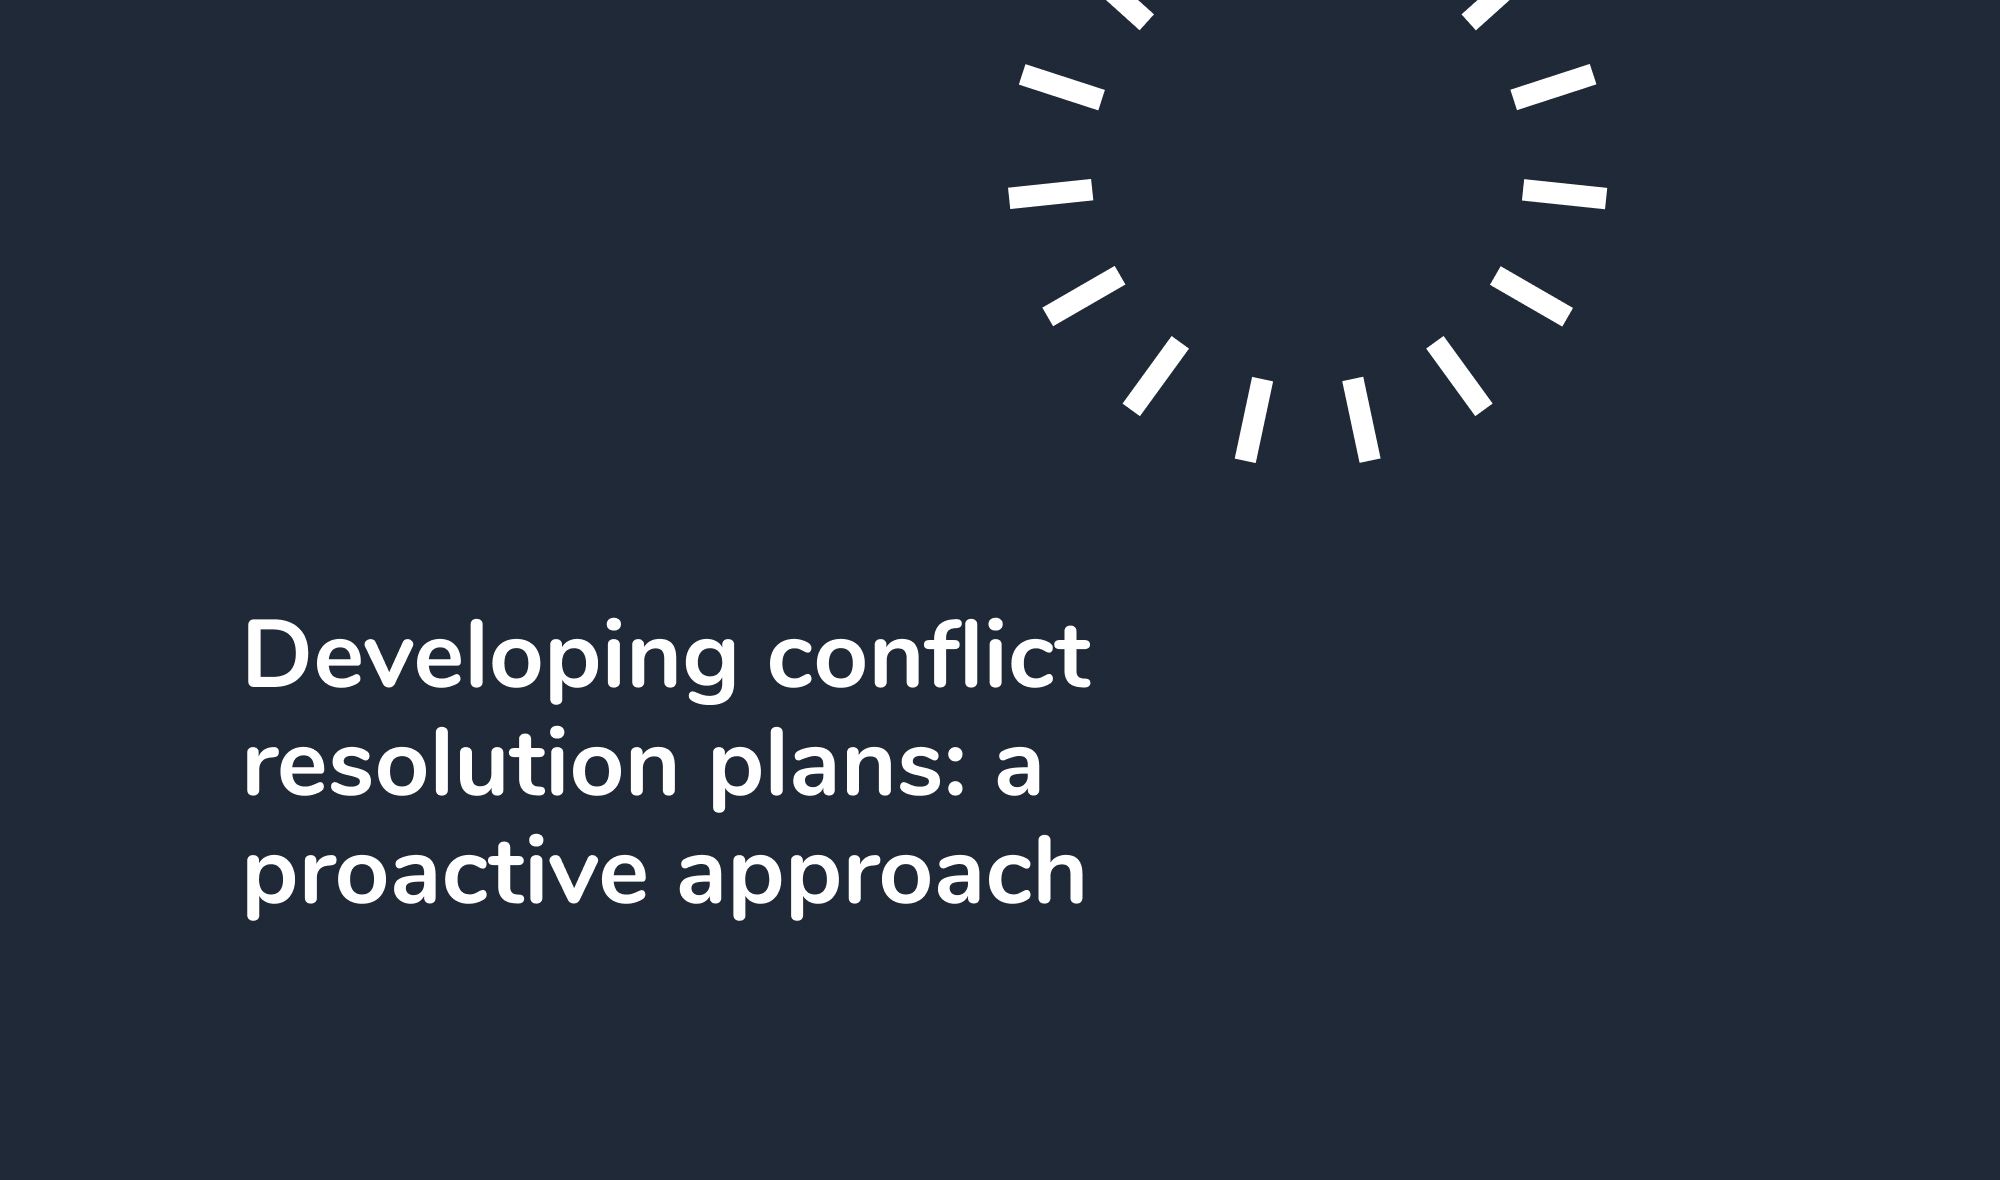 Developing conflict resolution plans: a proactive approach